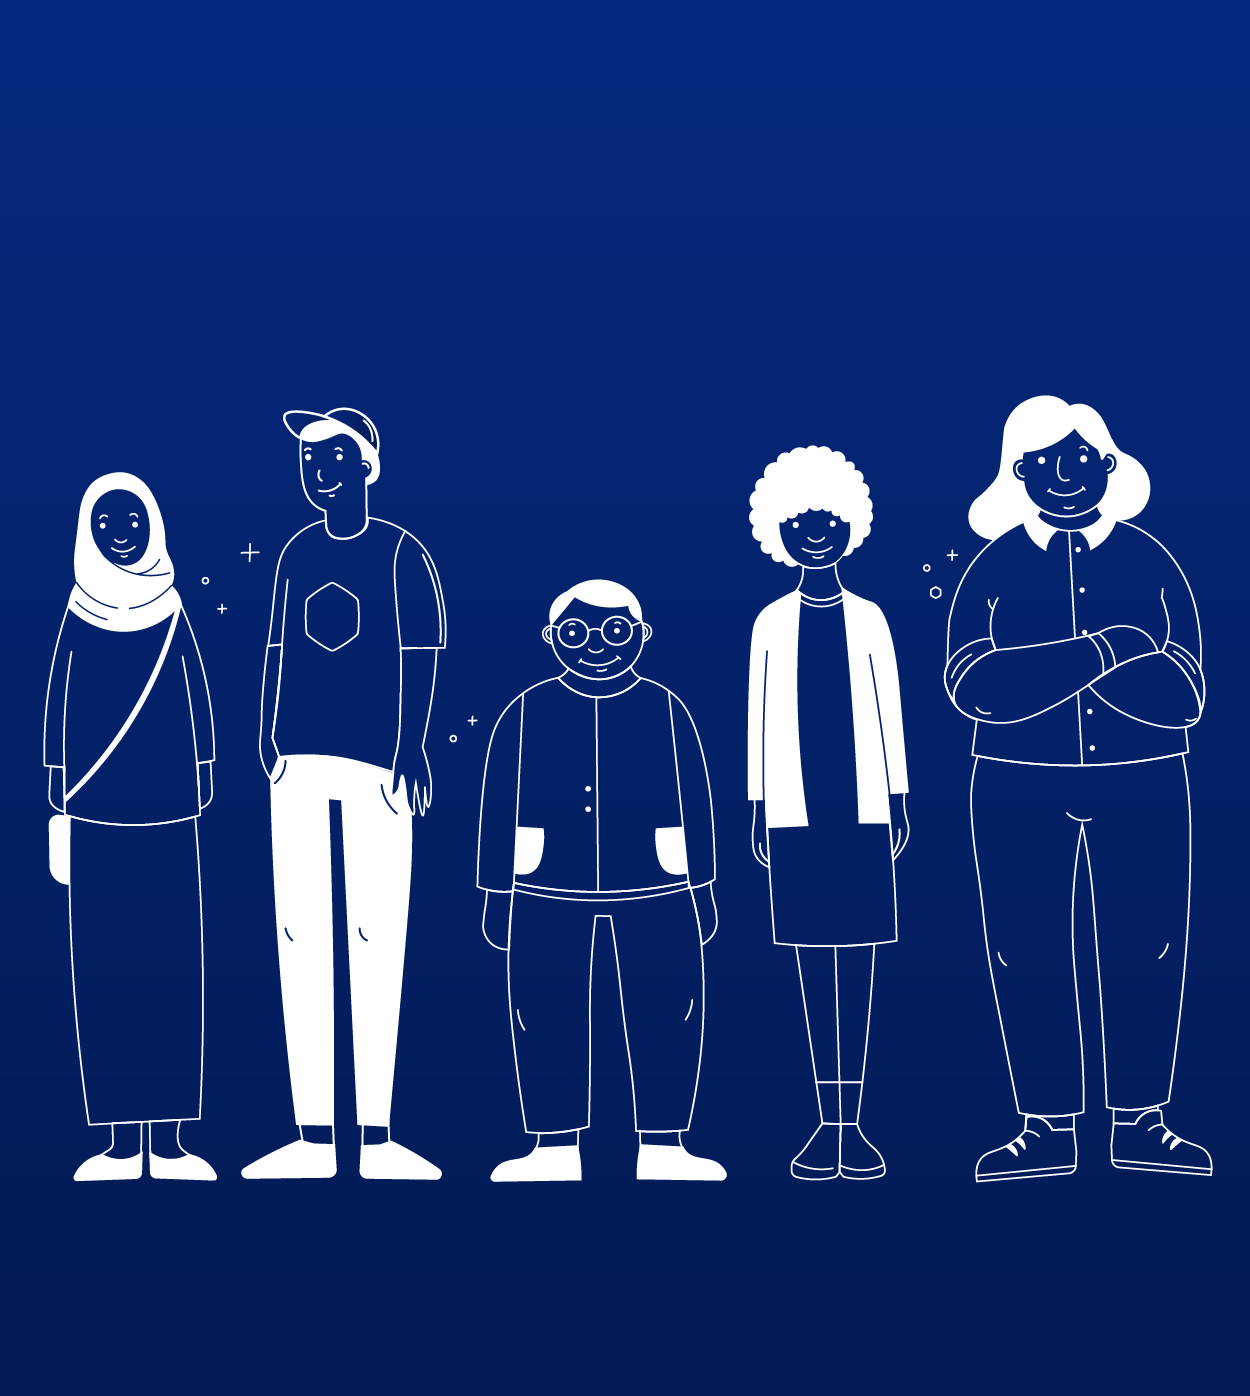 Illustration of 5 people standing in a line